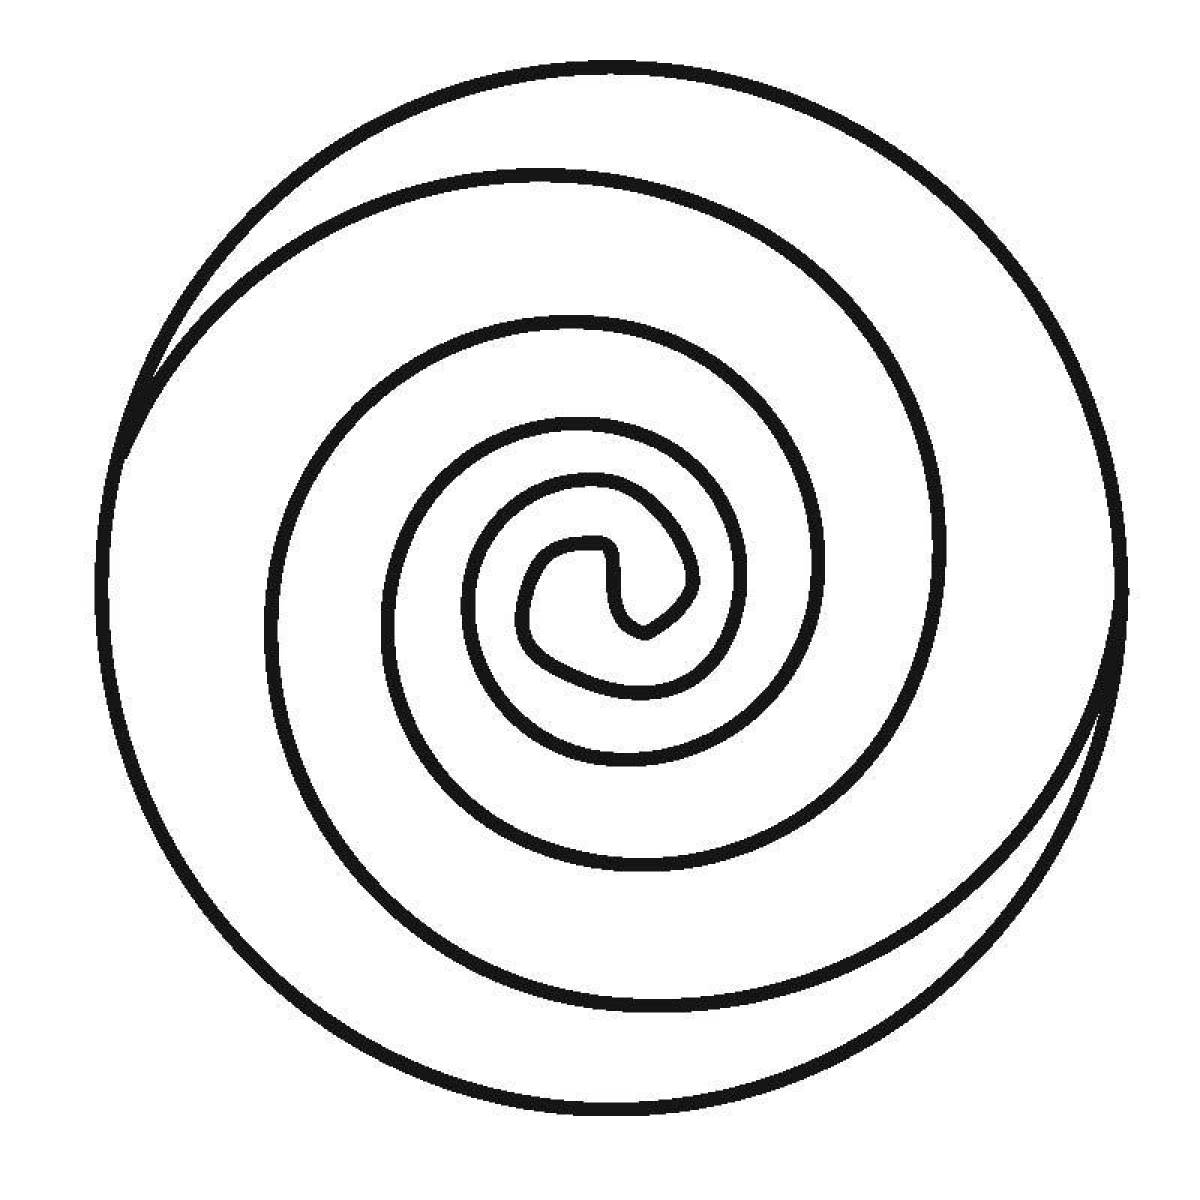 Magic spiral coloring page